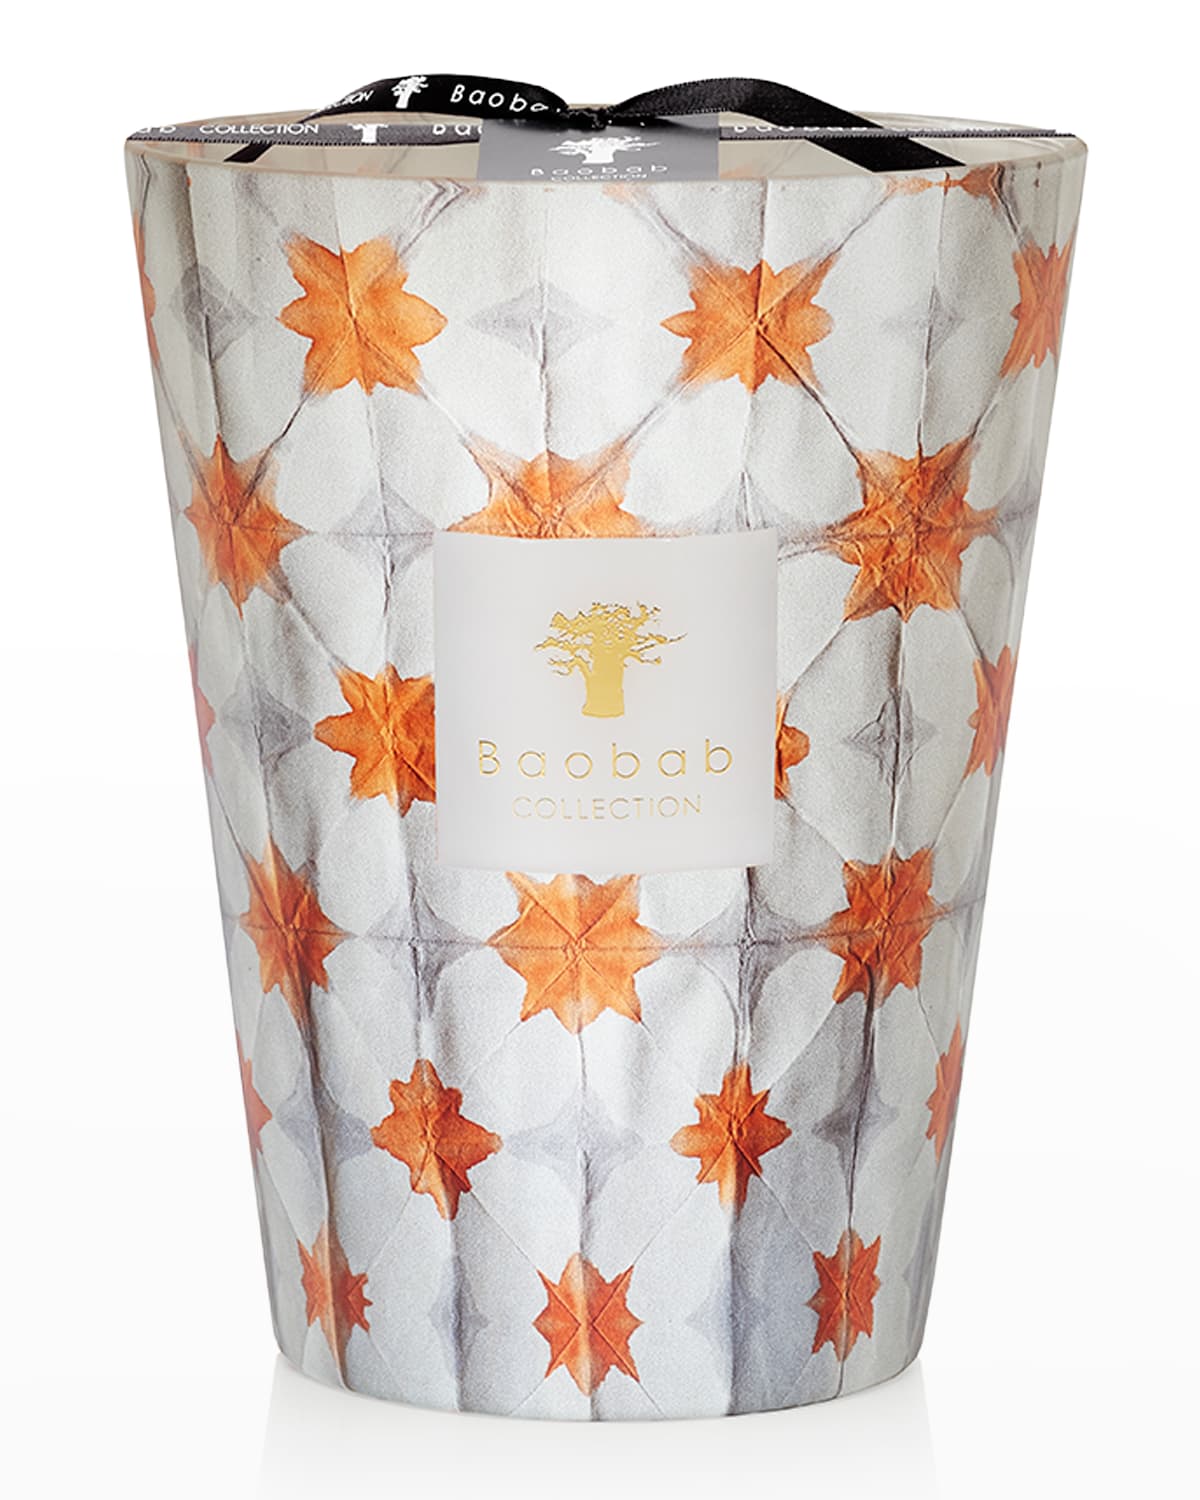 BAOBAB COLLECTION MAX 24 ODYSSEE CALYPSO SCENTED CANDLE